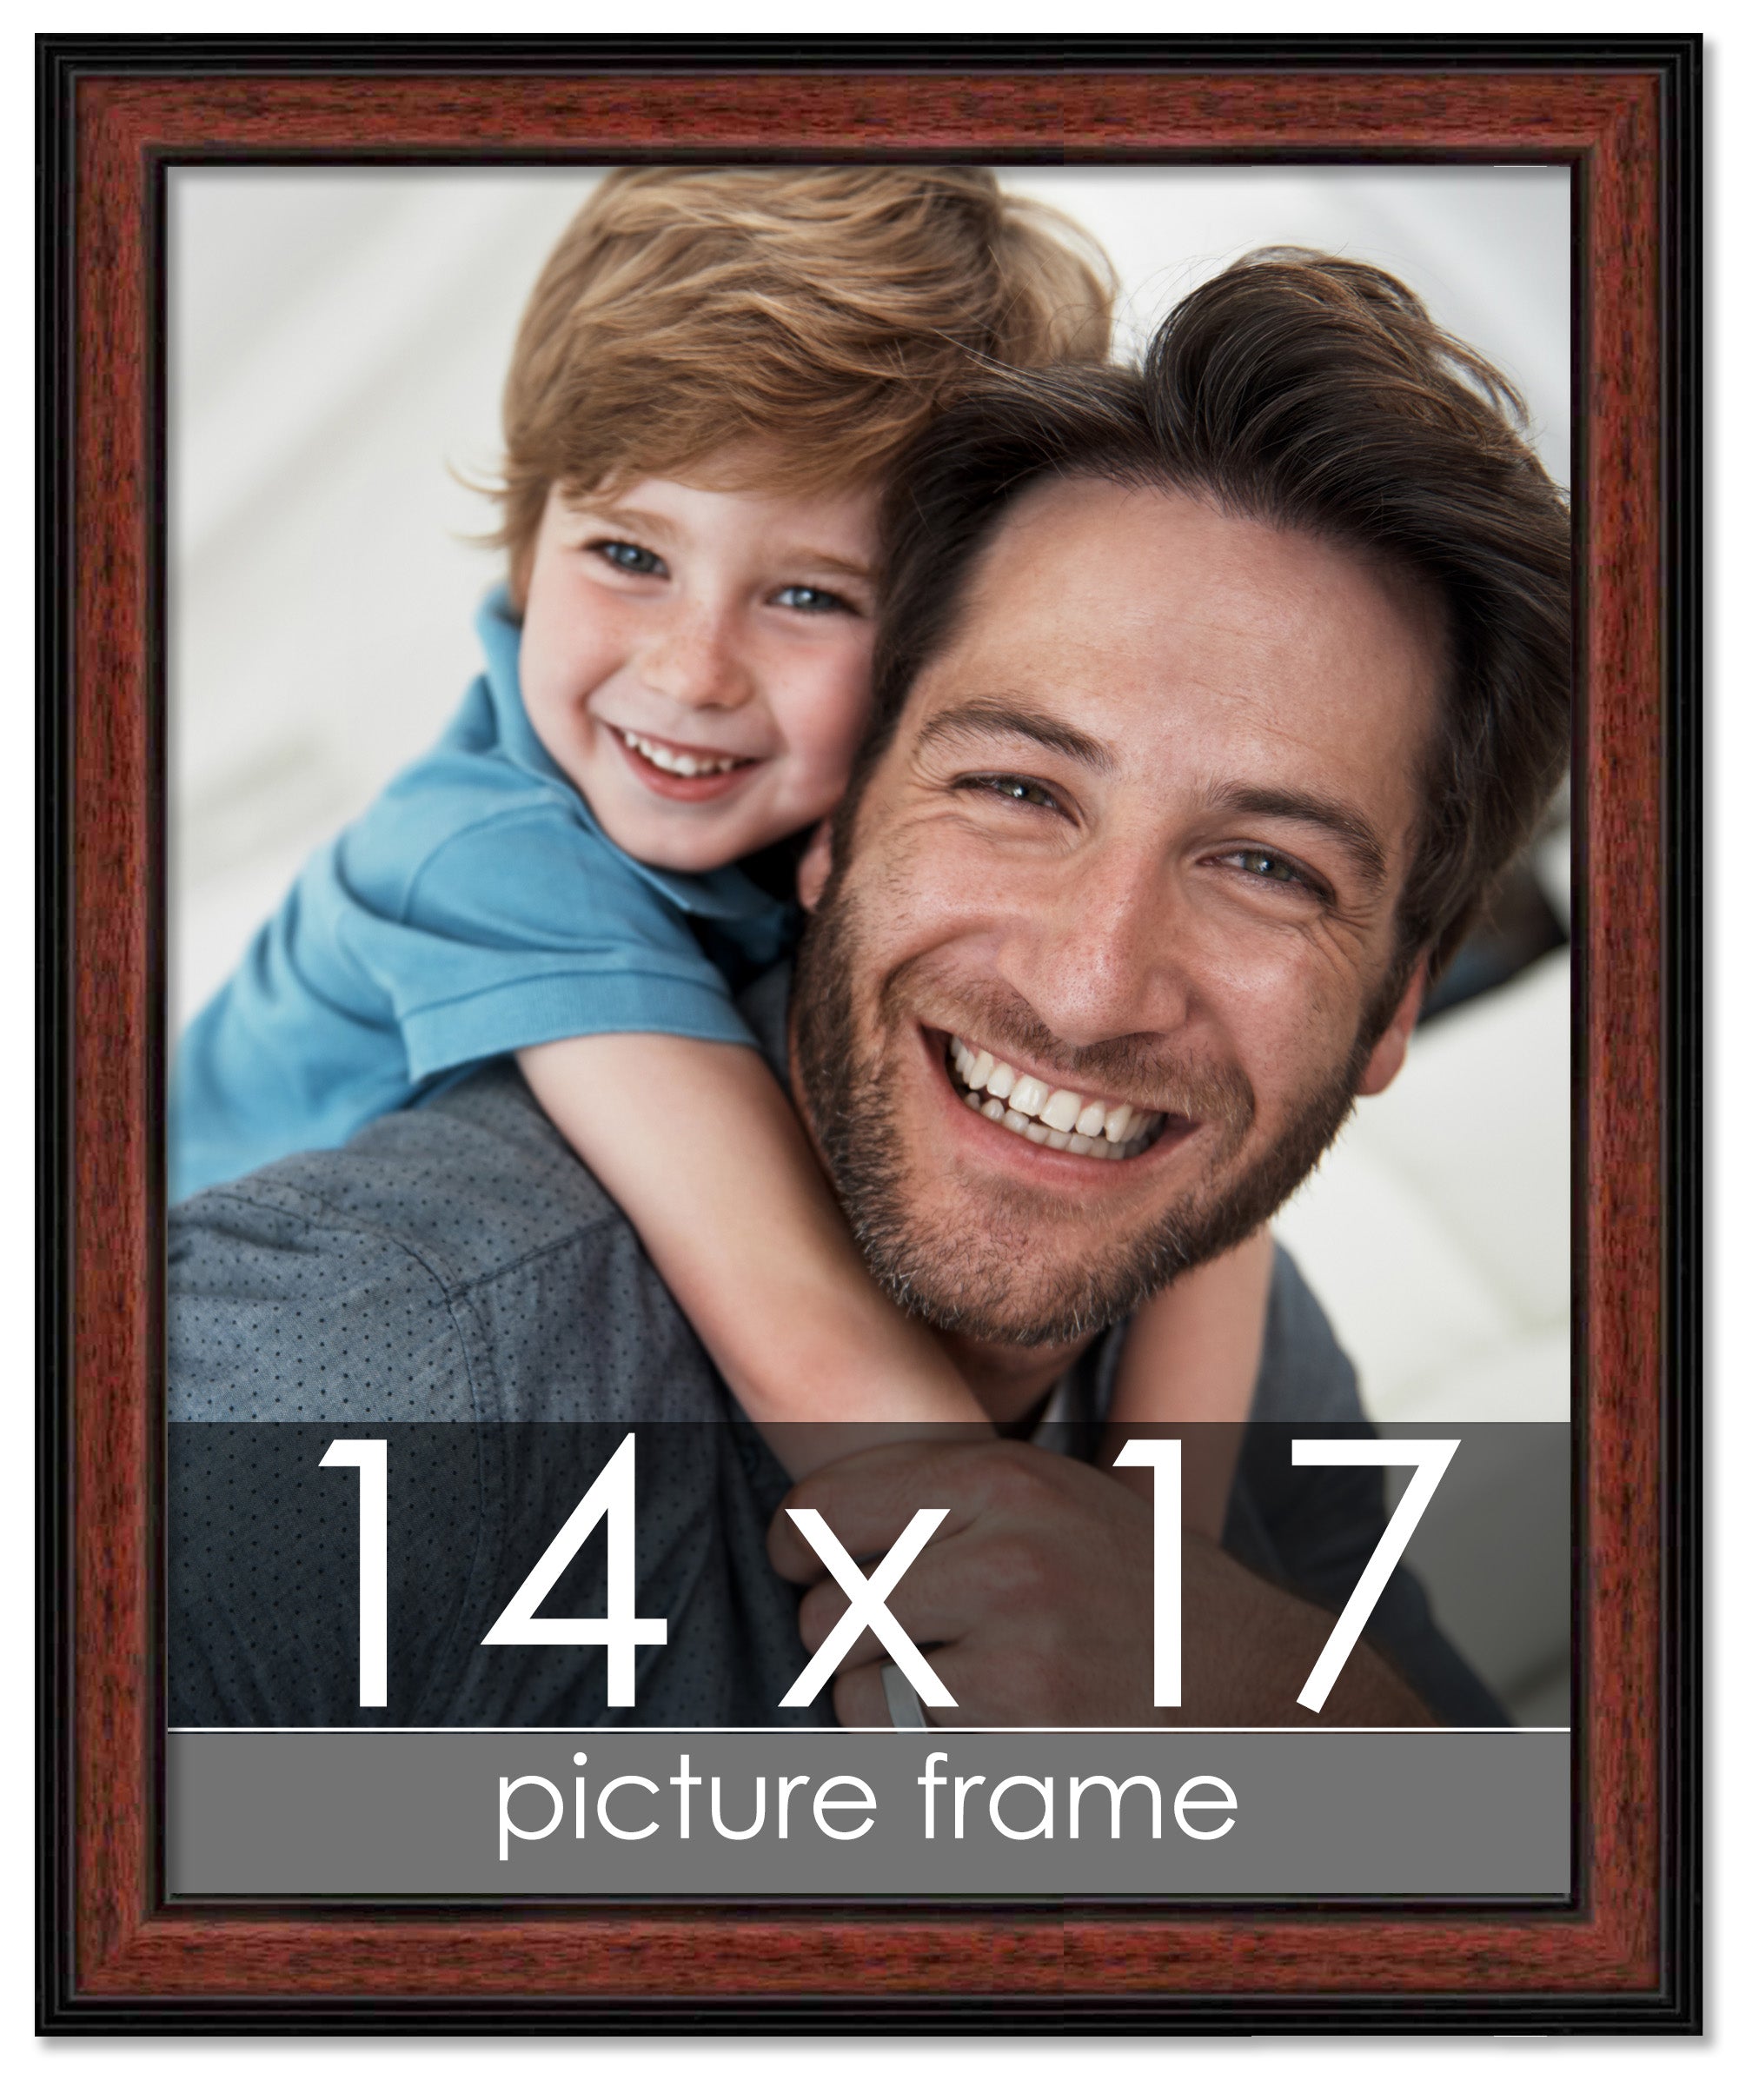 Traditional Mahogany Wood Picture Frame